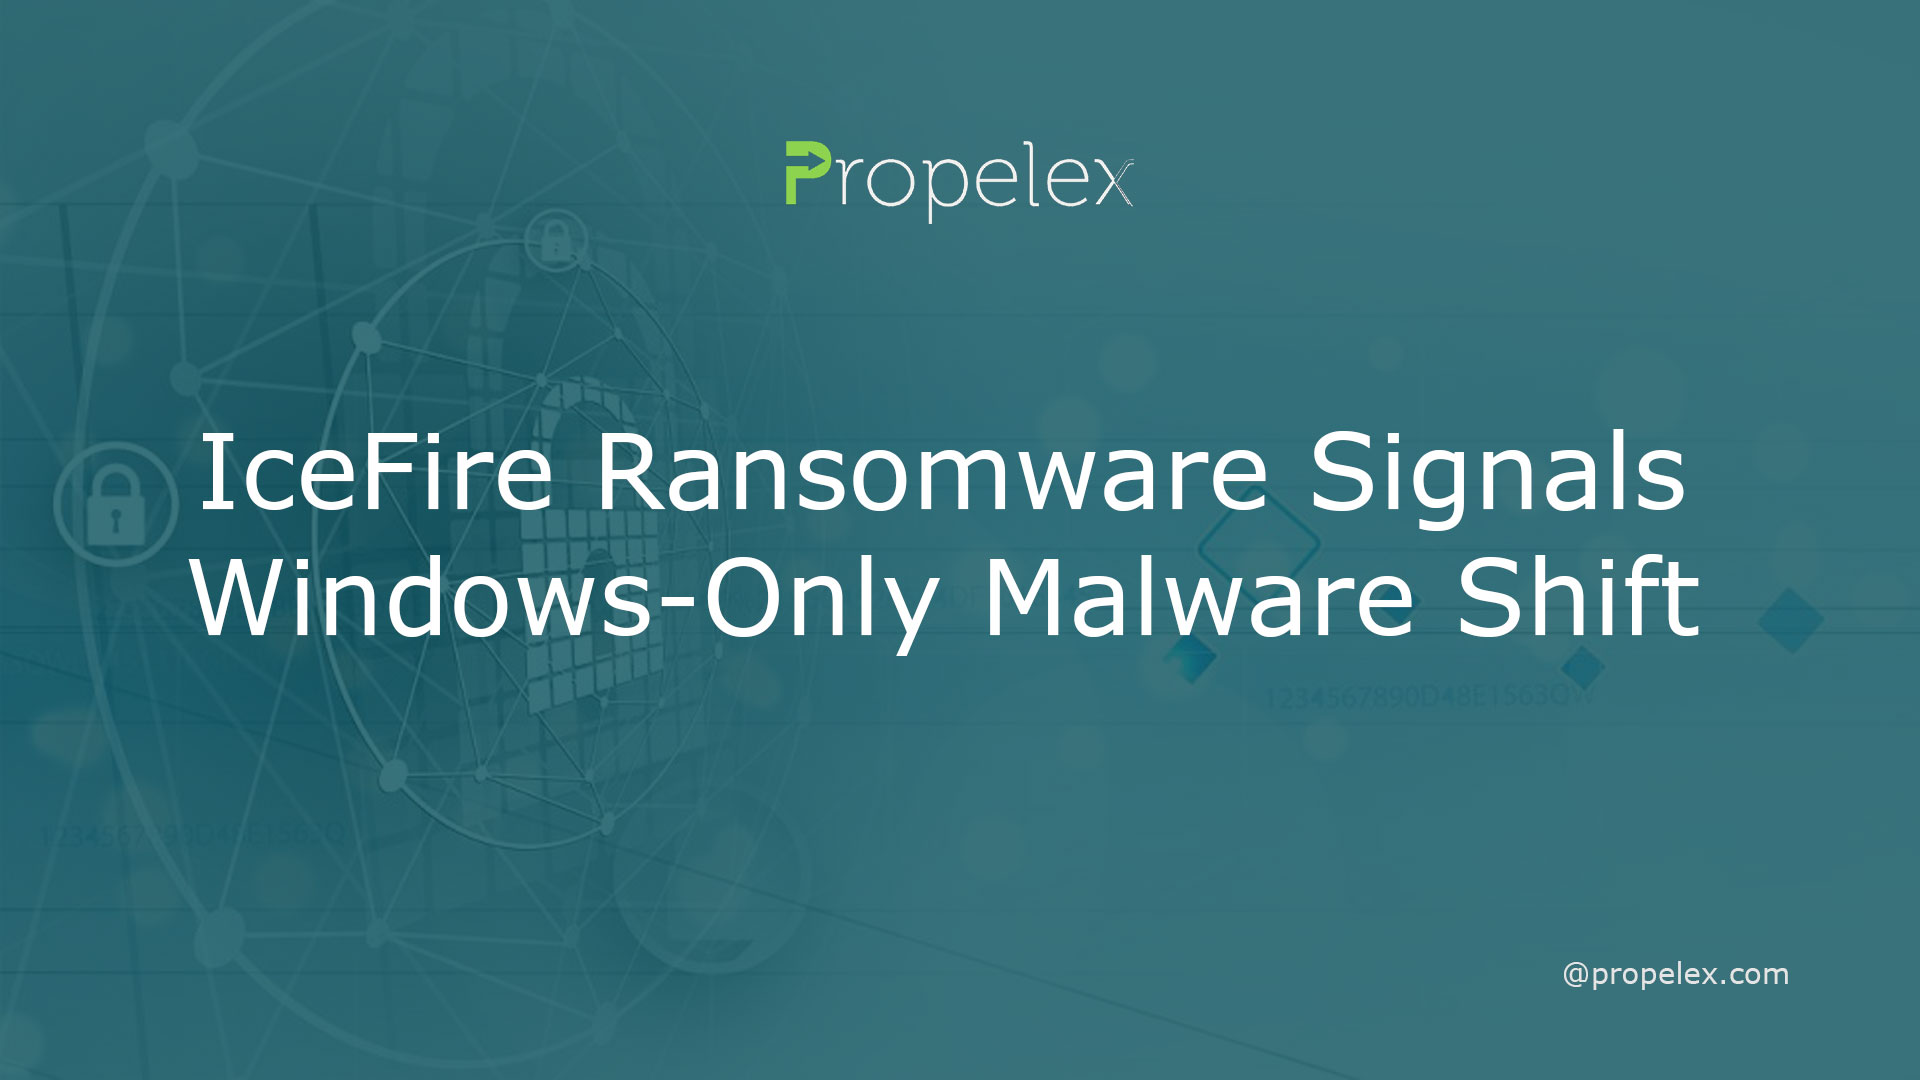 IceFire Ransomware Signals Windows-Only Malware Shift